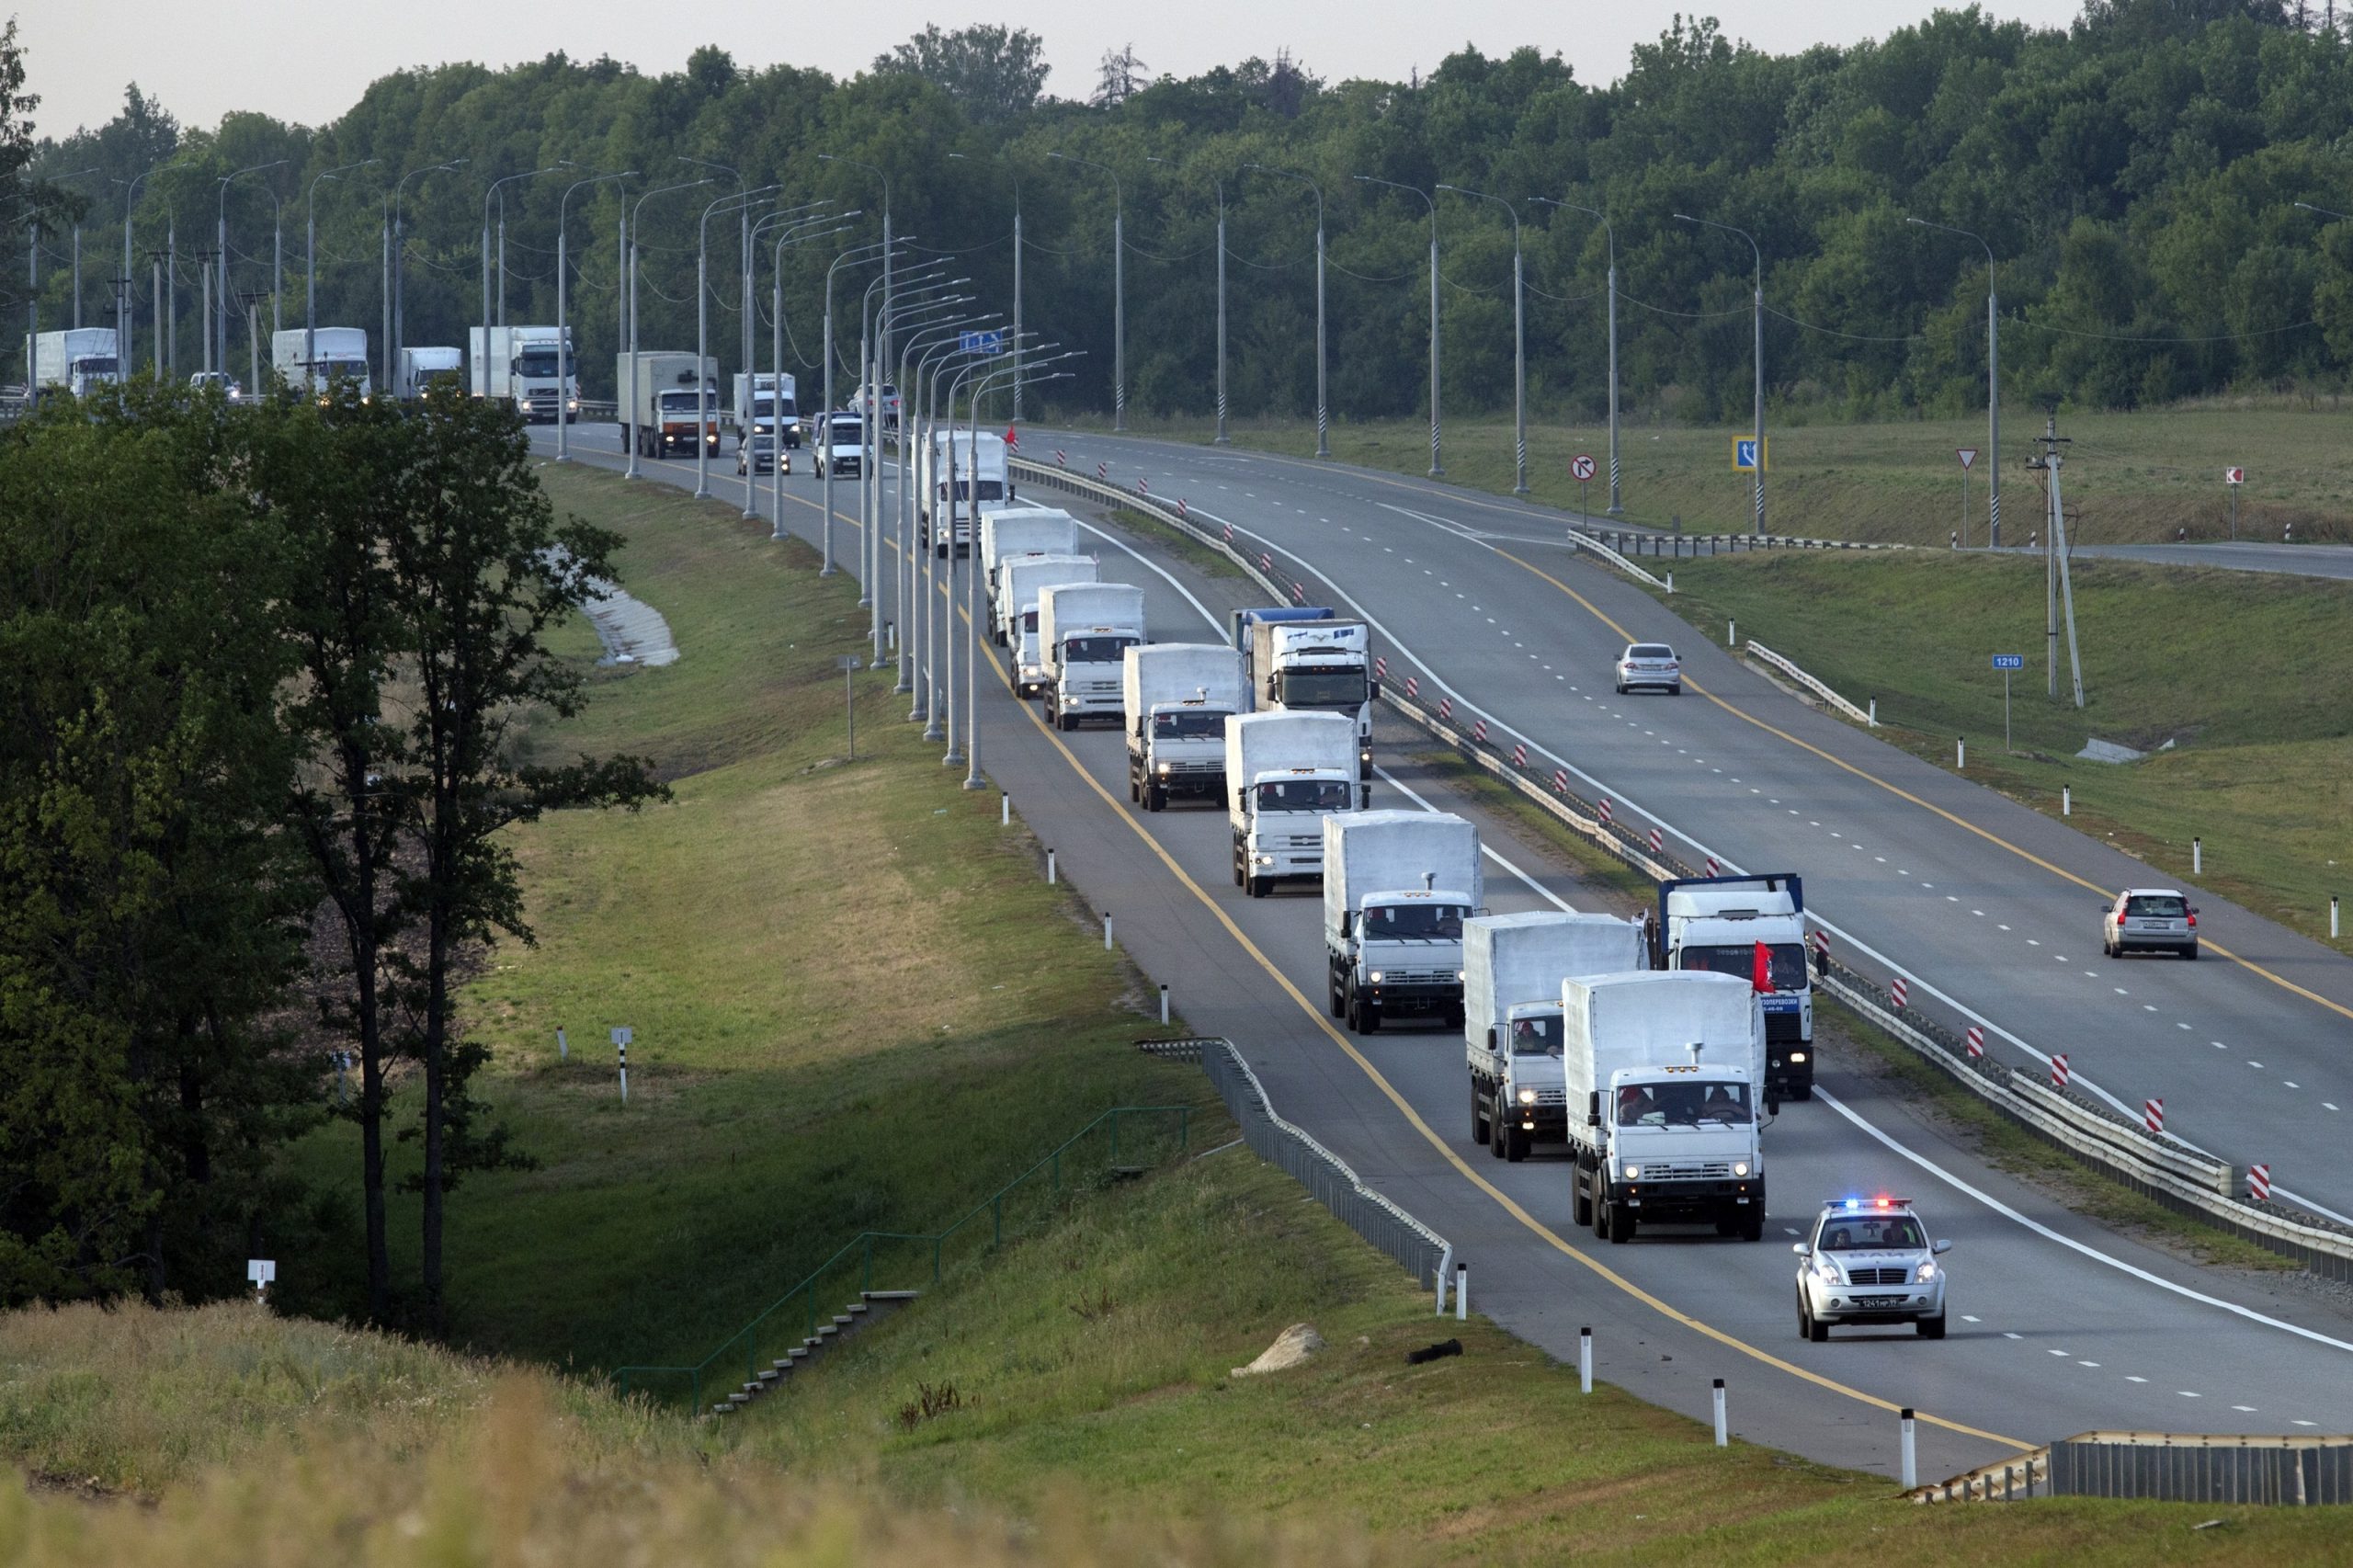 A convoy of white trucks carrying humanitarian aid passes along a highway in the Voronezh region of Russia, Tuesday, Aug. 12, 2014. (AP Photo/Pavel Golovkin)